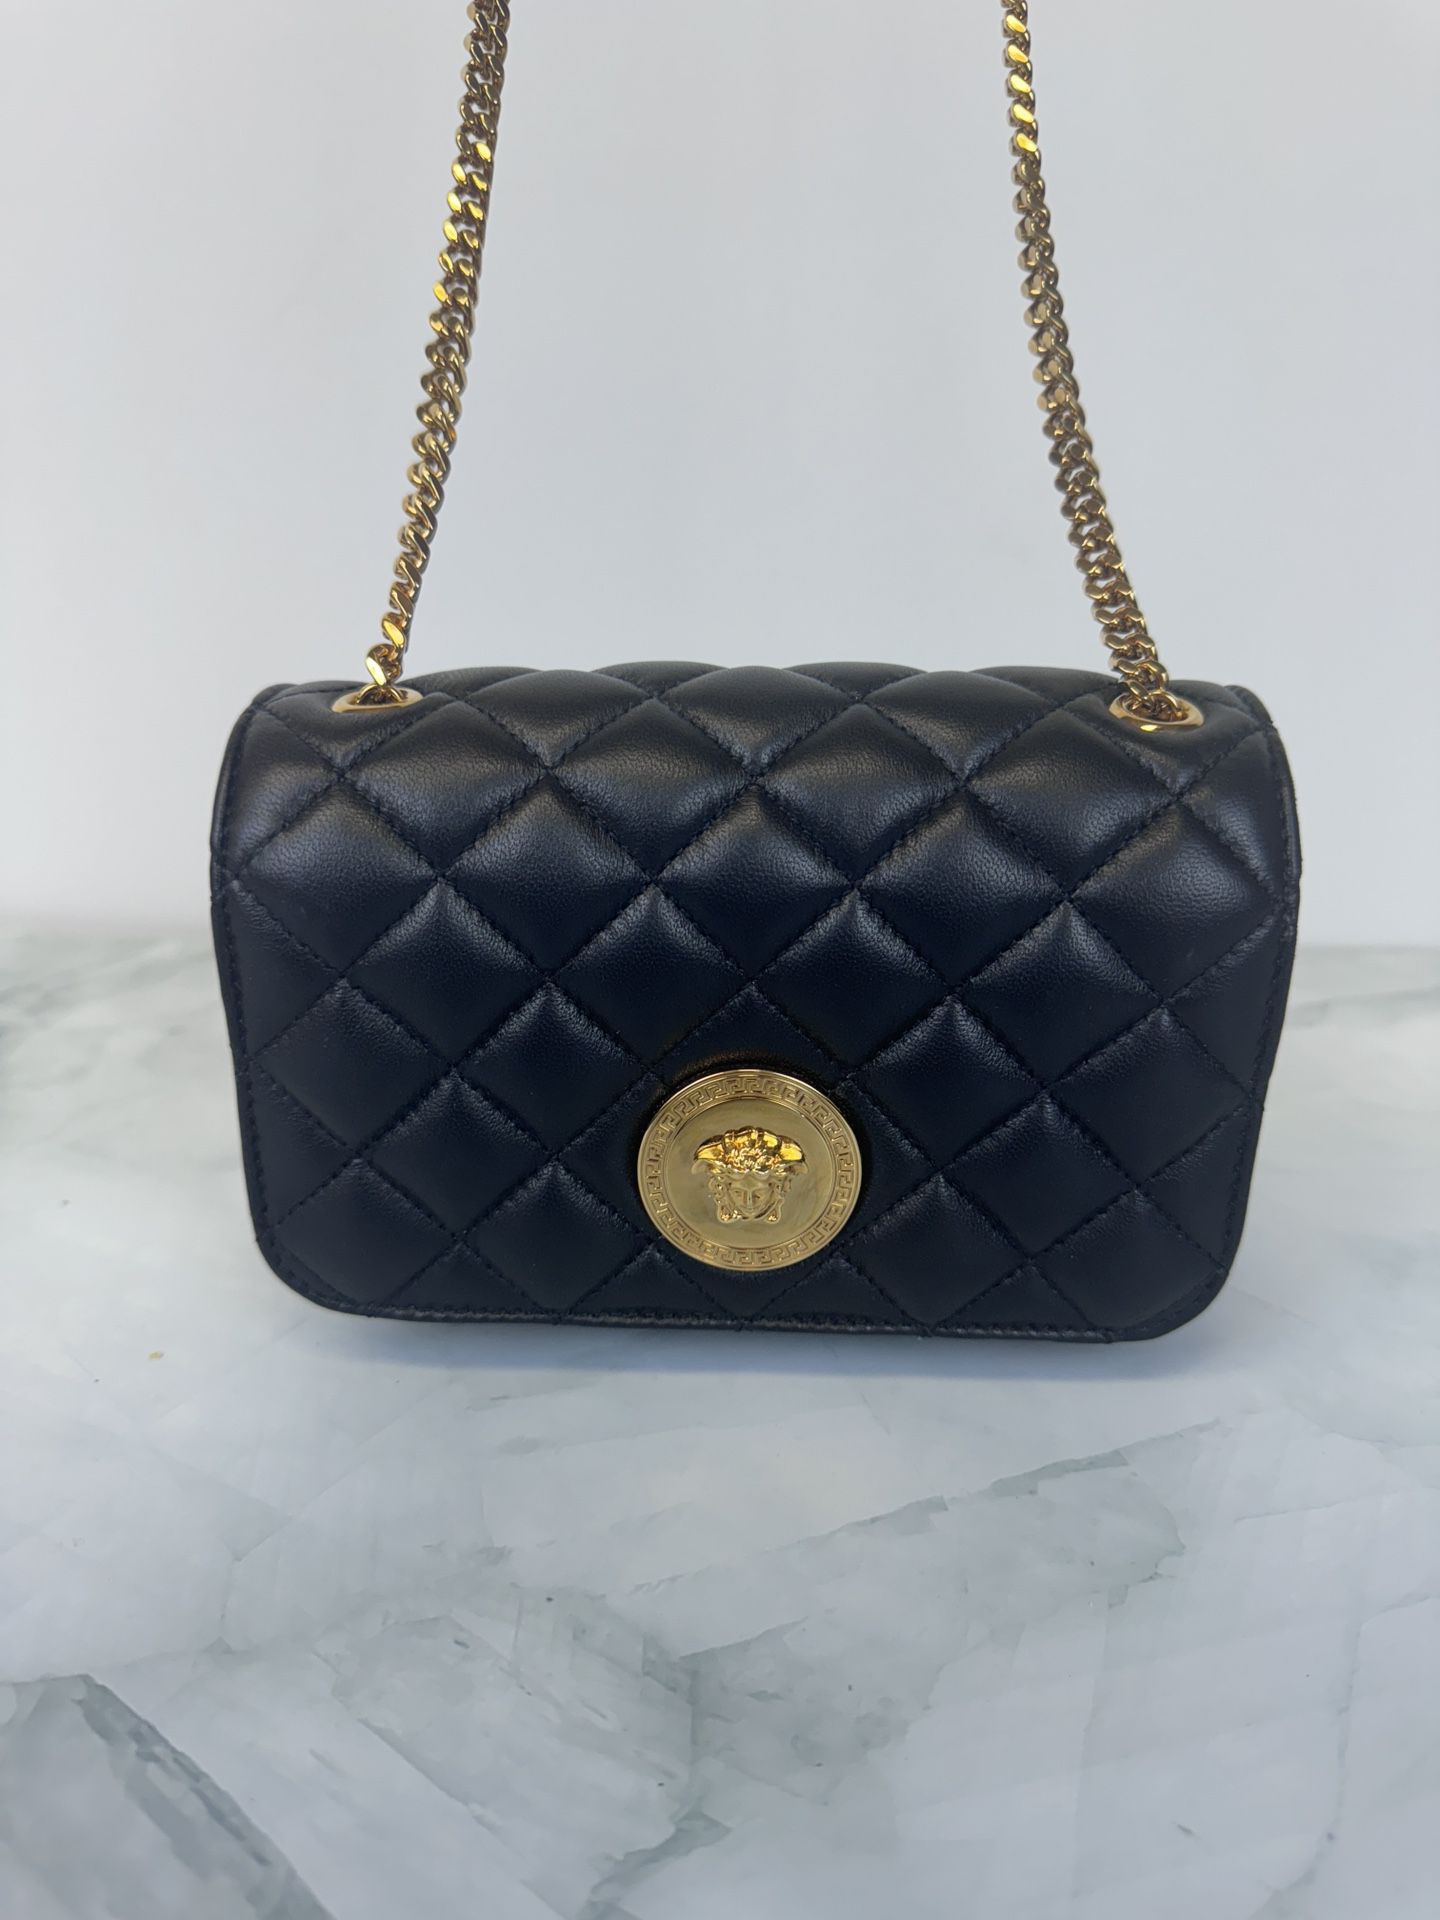 Versace Quilted Medusa Head Small Black Leather Crossbody Bag 